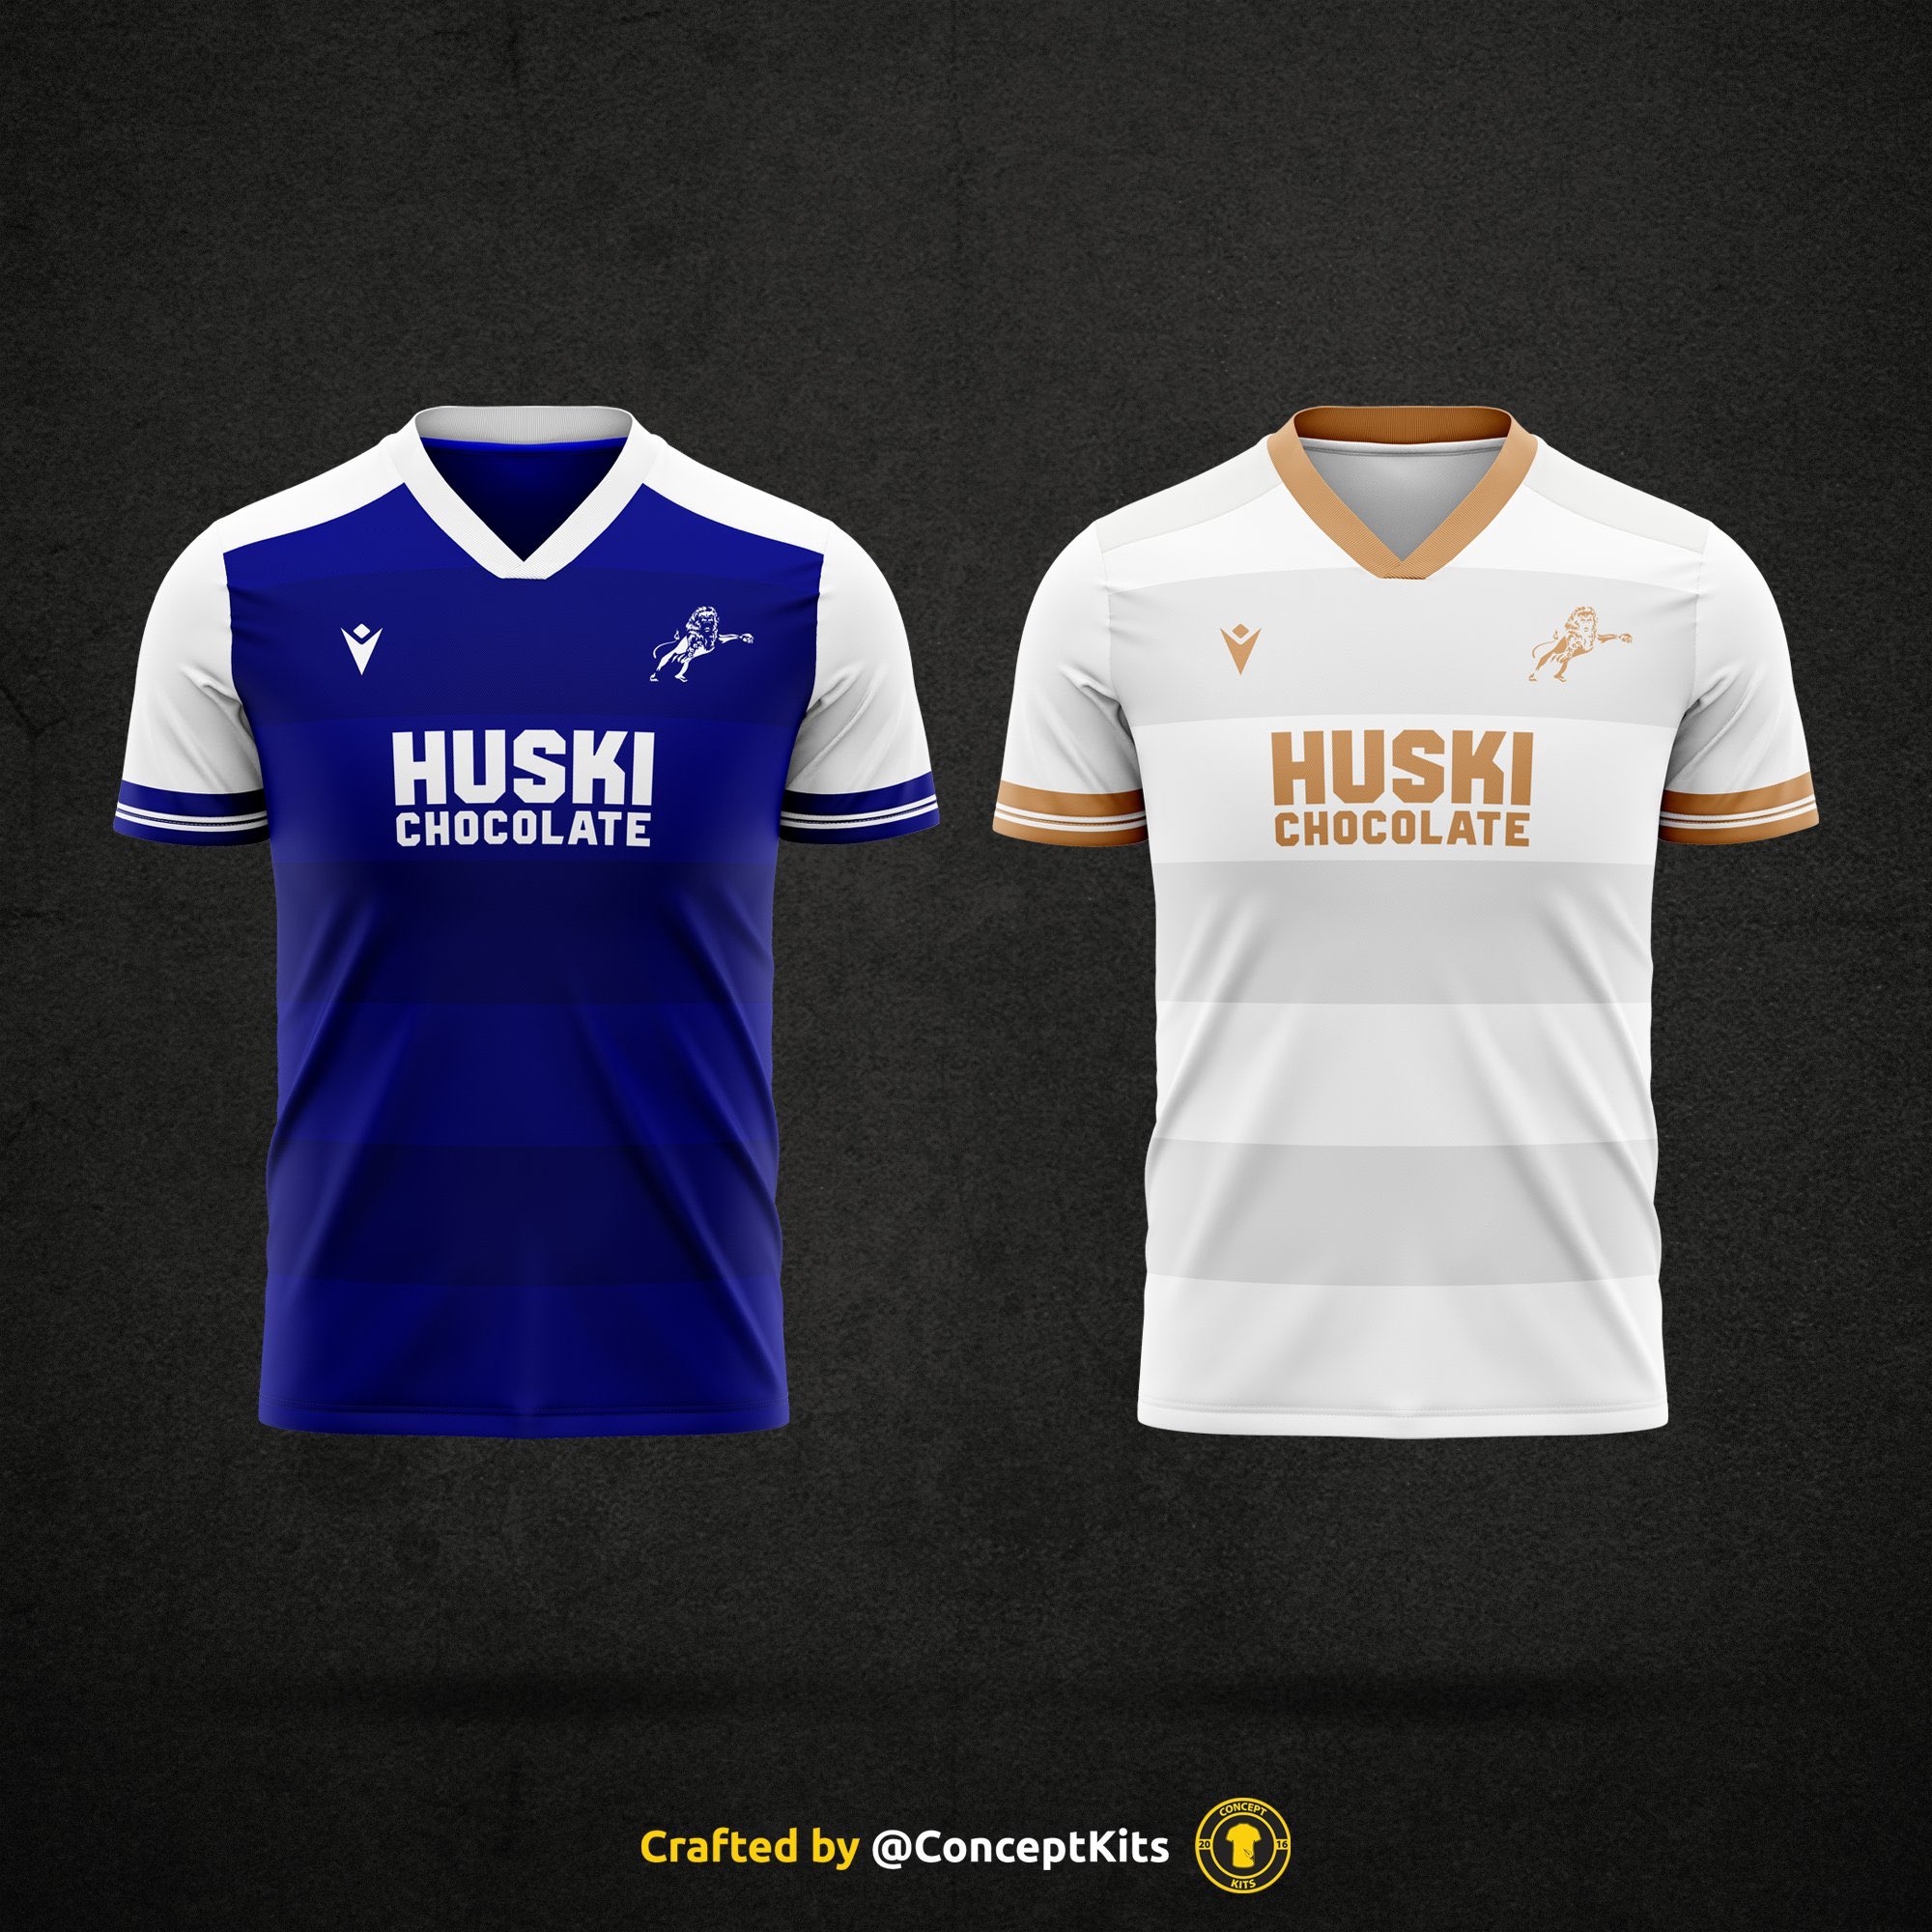 Concept Kits on Twitter: "Millwall Football Club home and away kit concept  for the 2020/21 season. (Requested by @_ConnorFrancis) #MillwallFC #Millwall  https://t.co/VsjgoMG8Ix" / Twitter